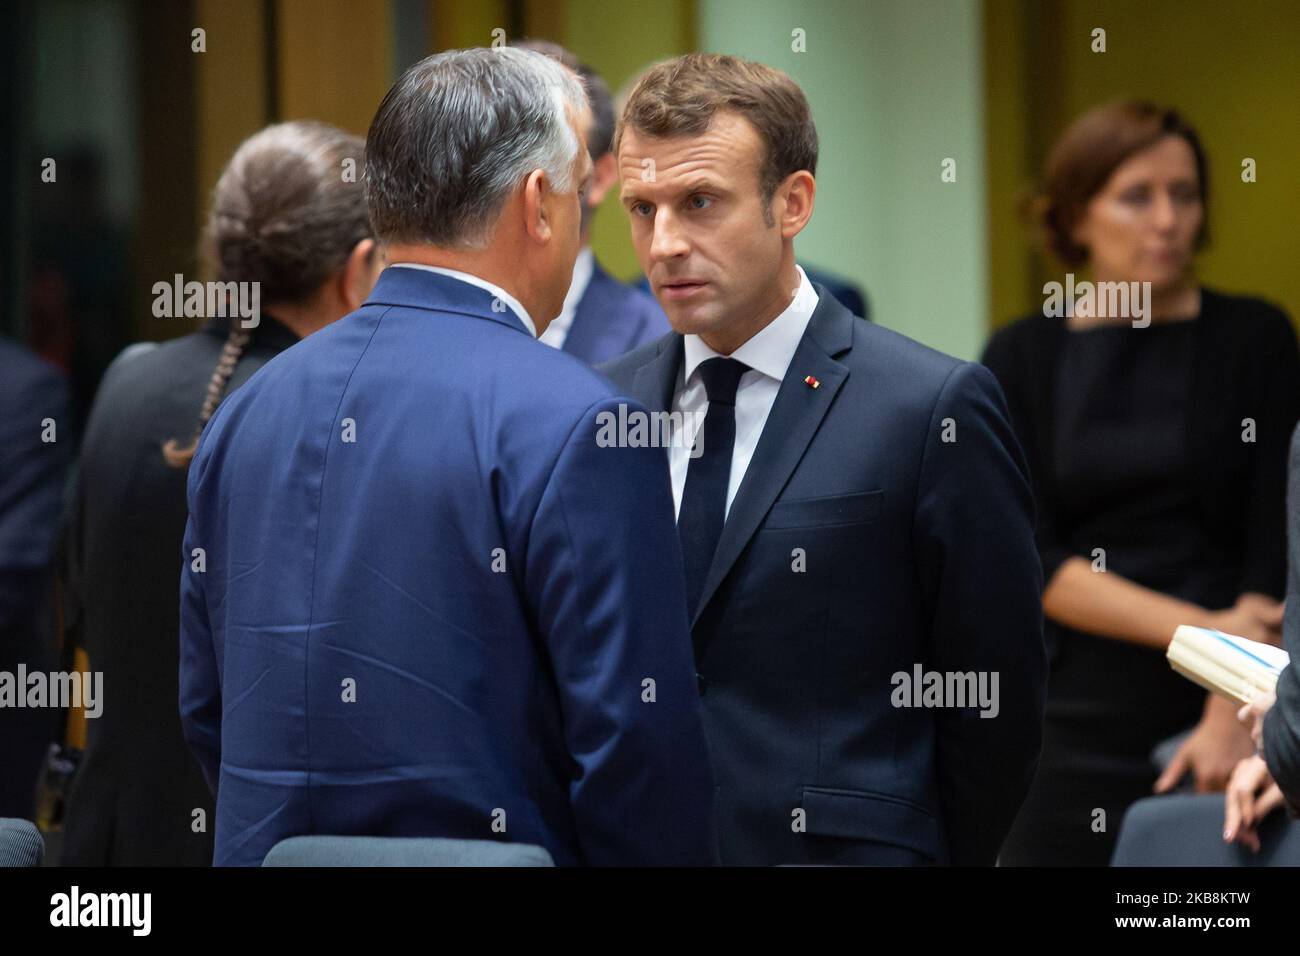 President of France, Emmanuel Macron. European leaders talk ahead of round table talks at the second day of EU leaders summit without the British PM Boris Johnson on October 18, 2019, in Brussels, Belgium. EU and UK negotiators announced an agreement on the United Kingdom's departure from the European Union, Brexit. (Photo by Nicolas Economou/NurPhoto) Stock Photo